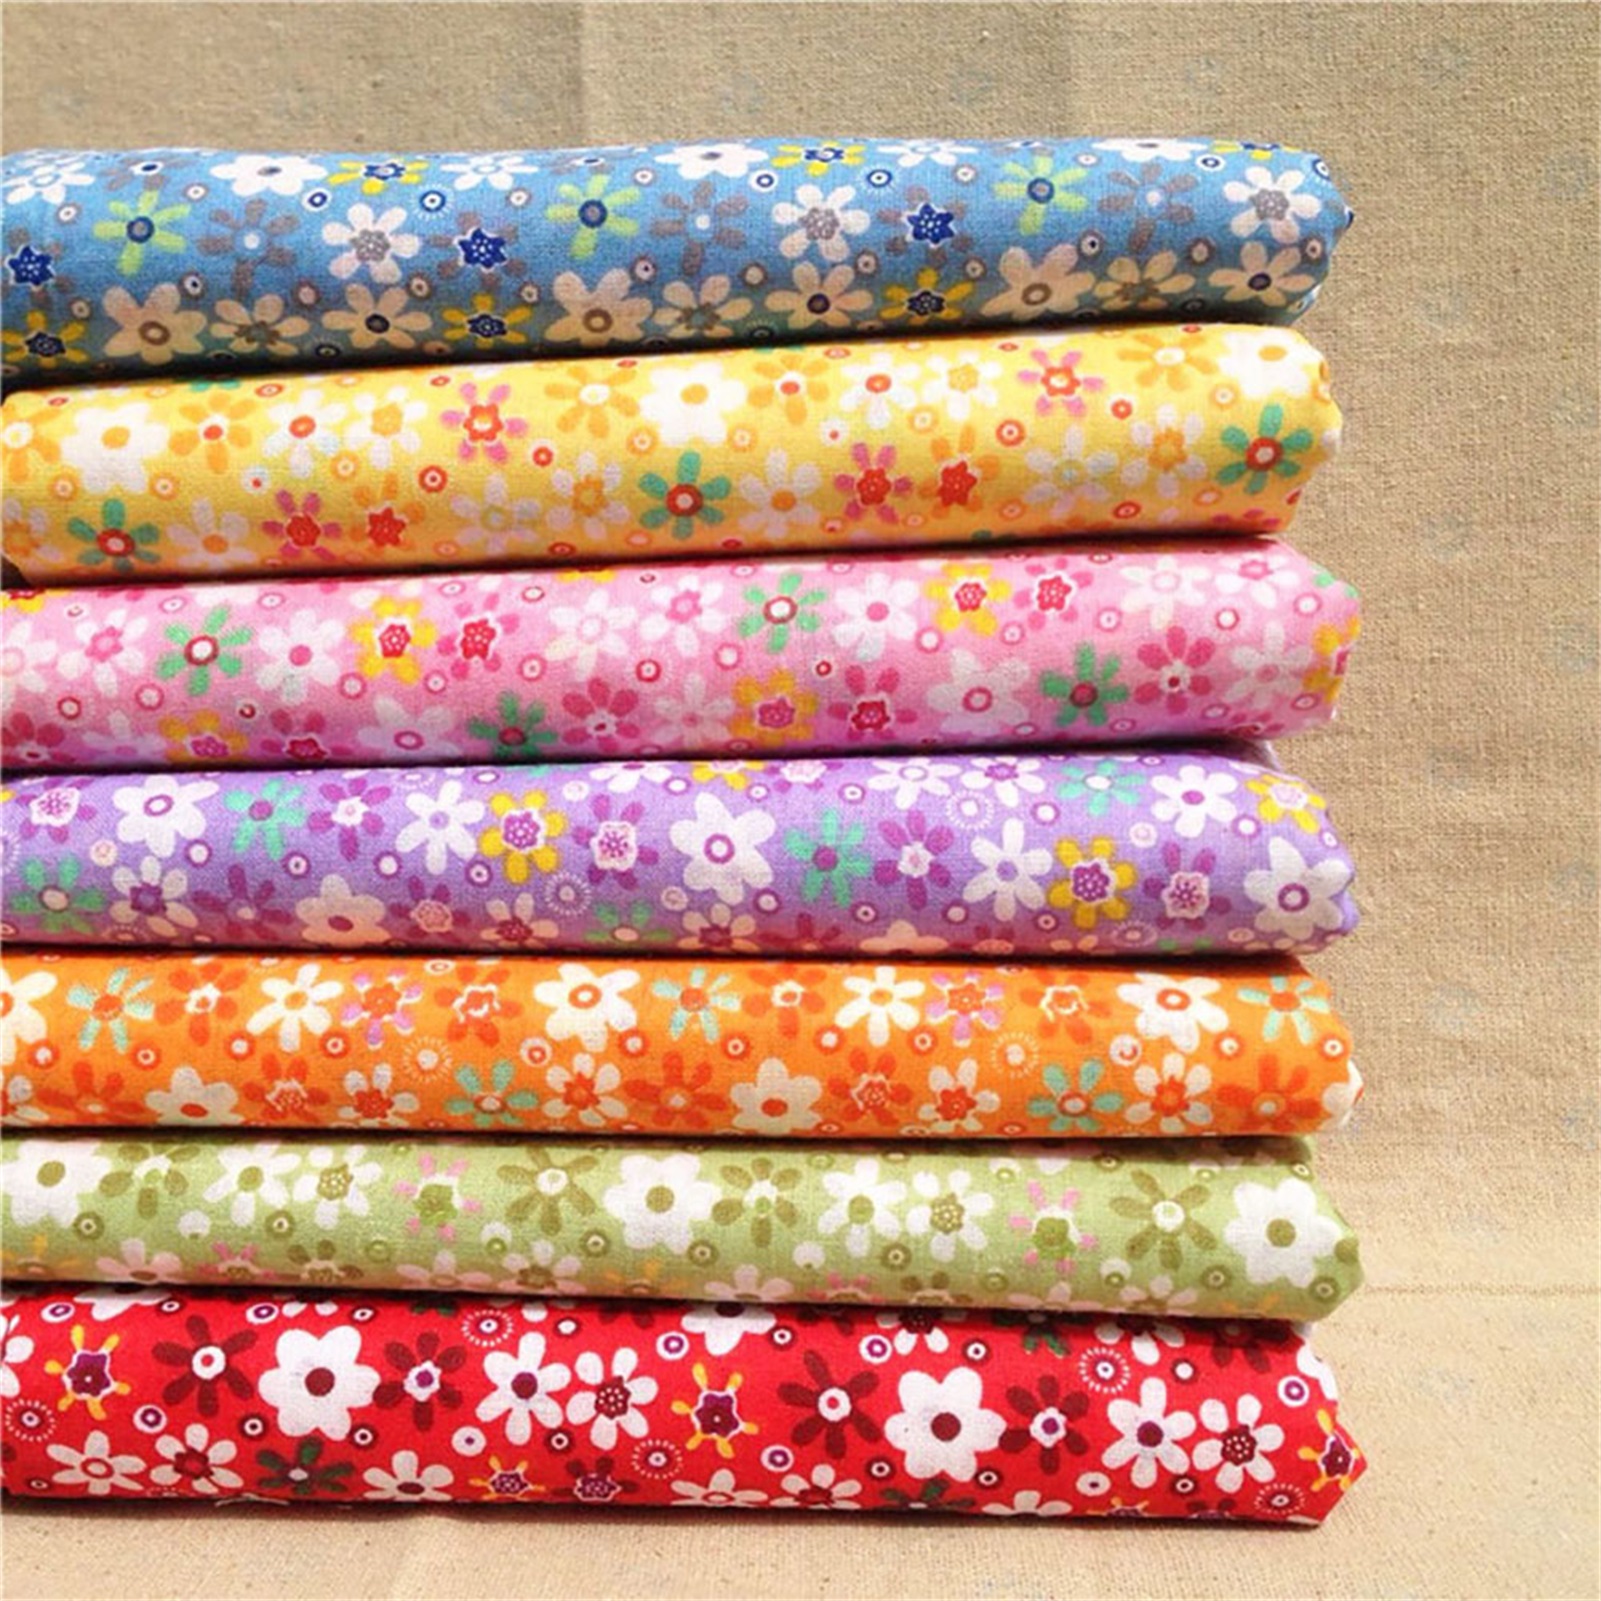 SPRING PARK 7Pcs/Set Soft Floral Print Cotton Cloth Fabric Hand Craft Sewing Material for DIY Handmade - image 1 of 7